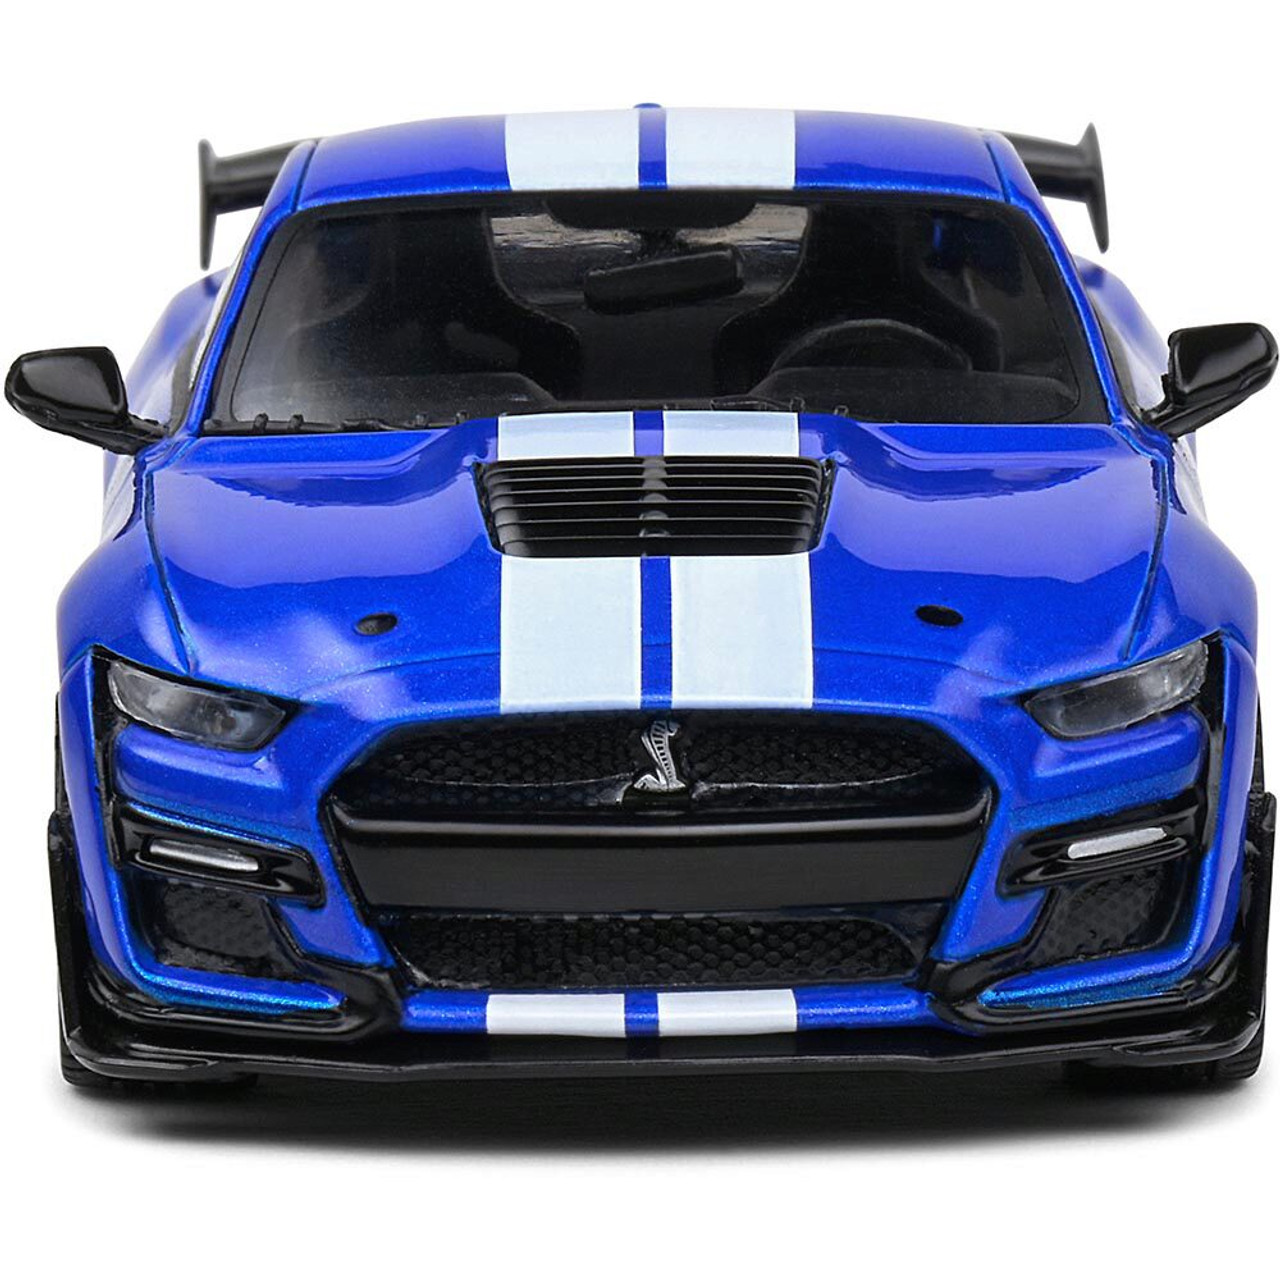 Ford Mustang GT500 Coupe 2020 Blue Solido S4311501 - Miniatures